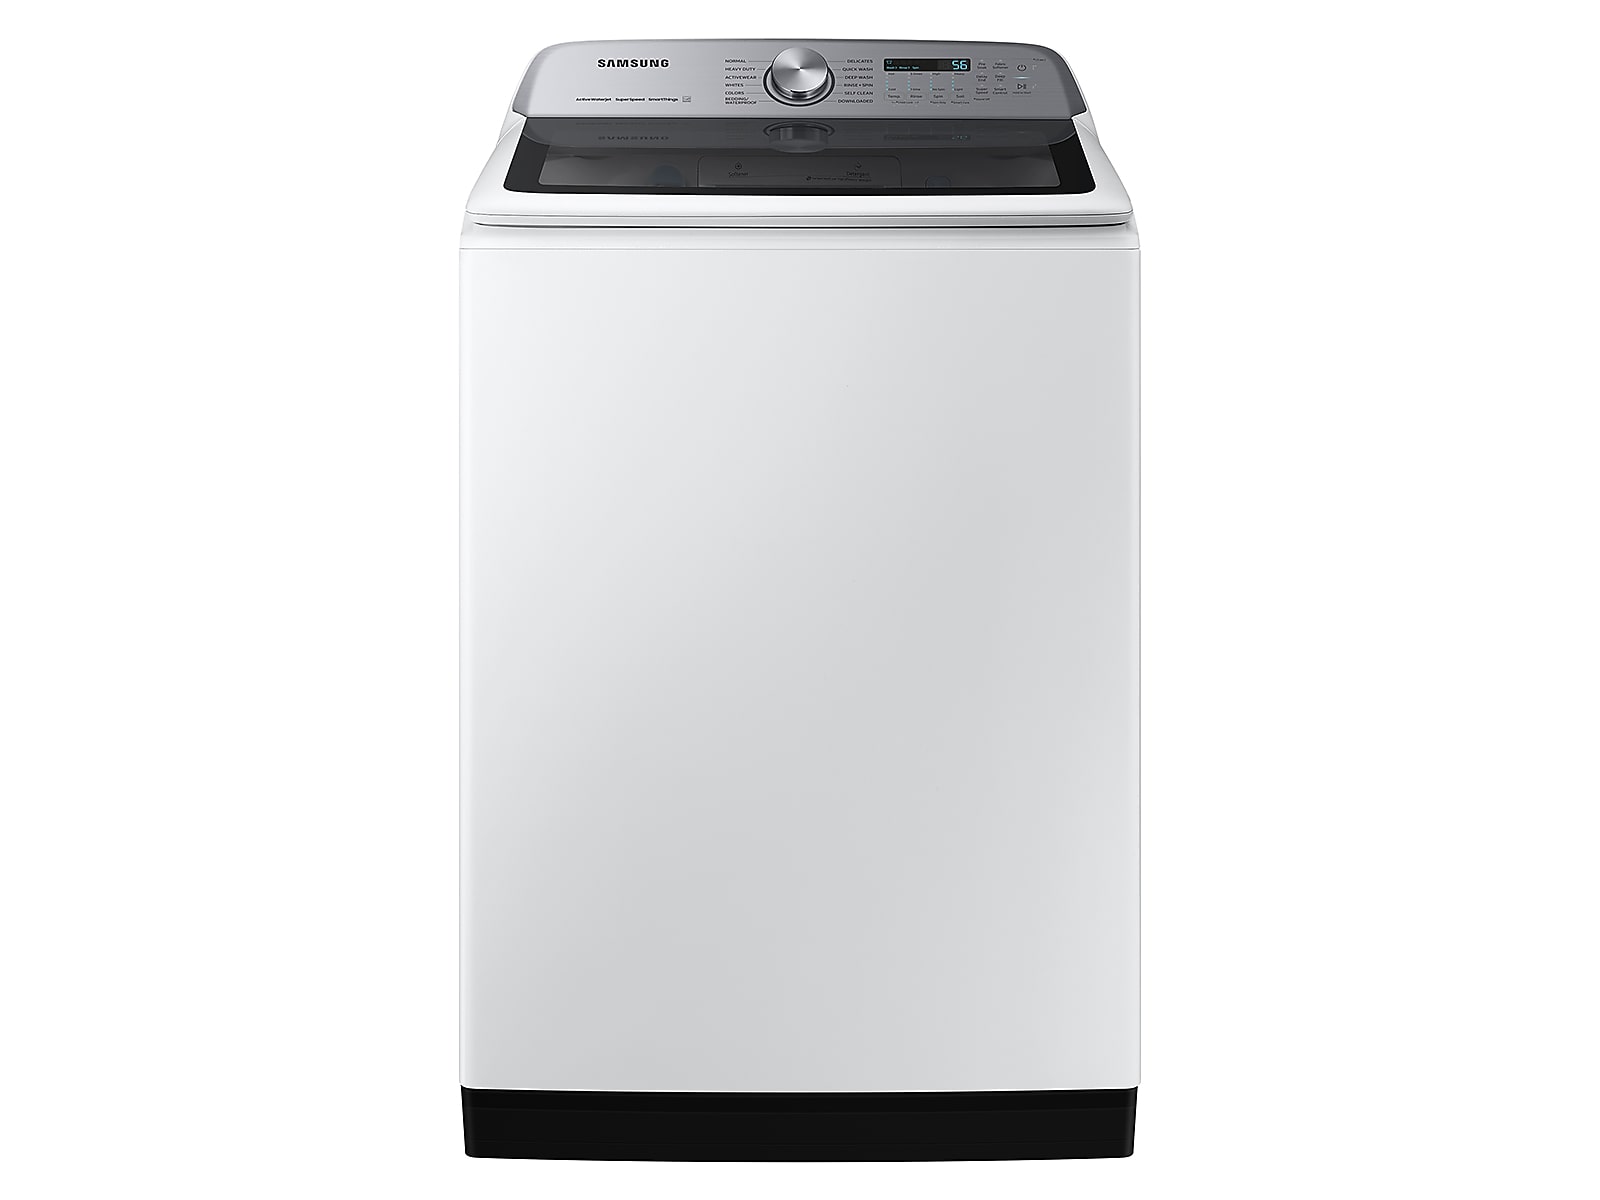 Samsung 5.5 cu. ft. Extra-Large Capacity Smart Top Load Washer with Super Speed Wash in White(WA55CG7100AWUS)